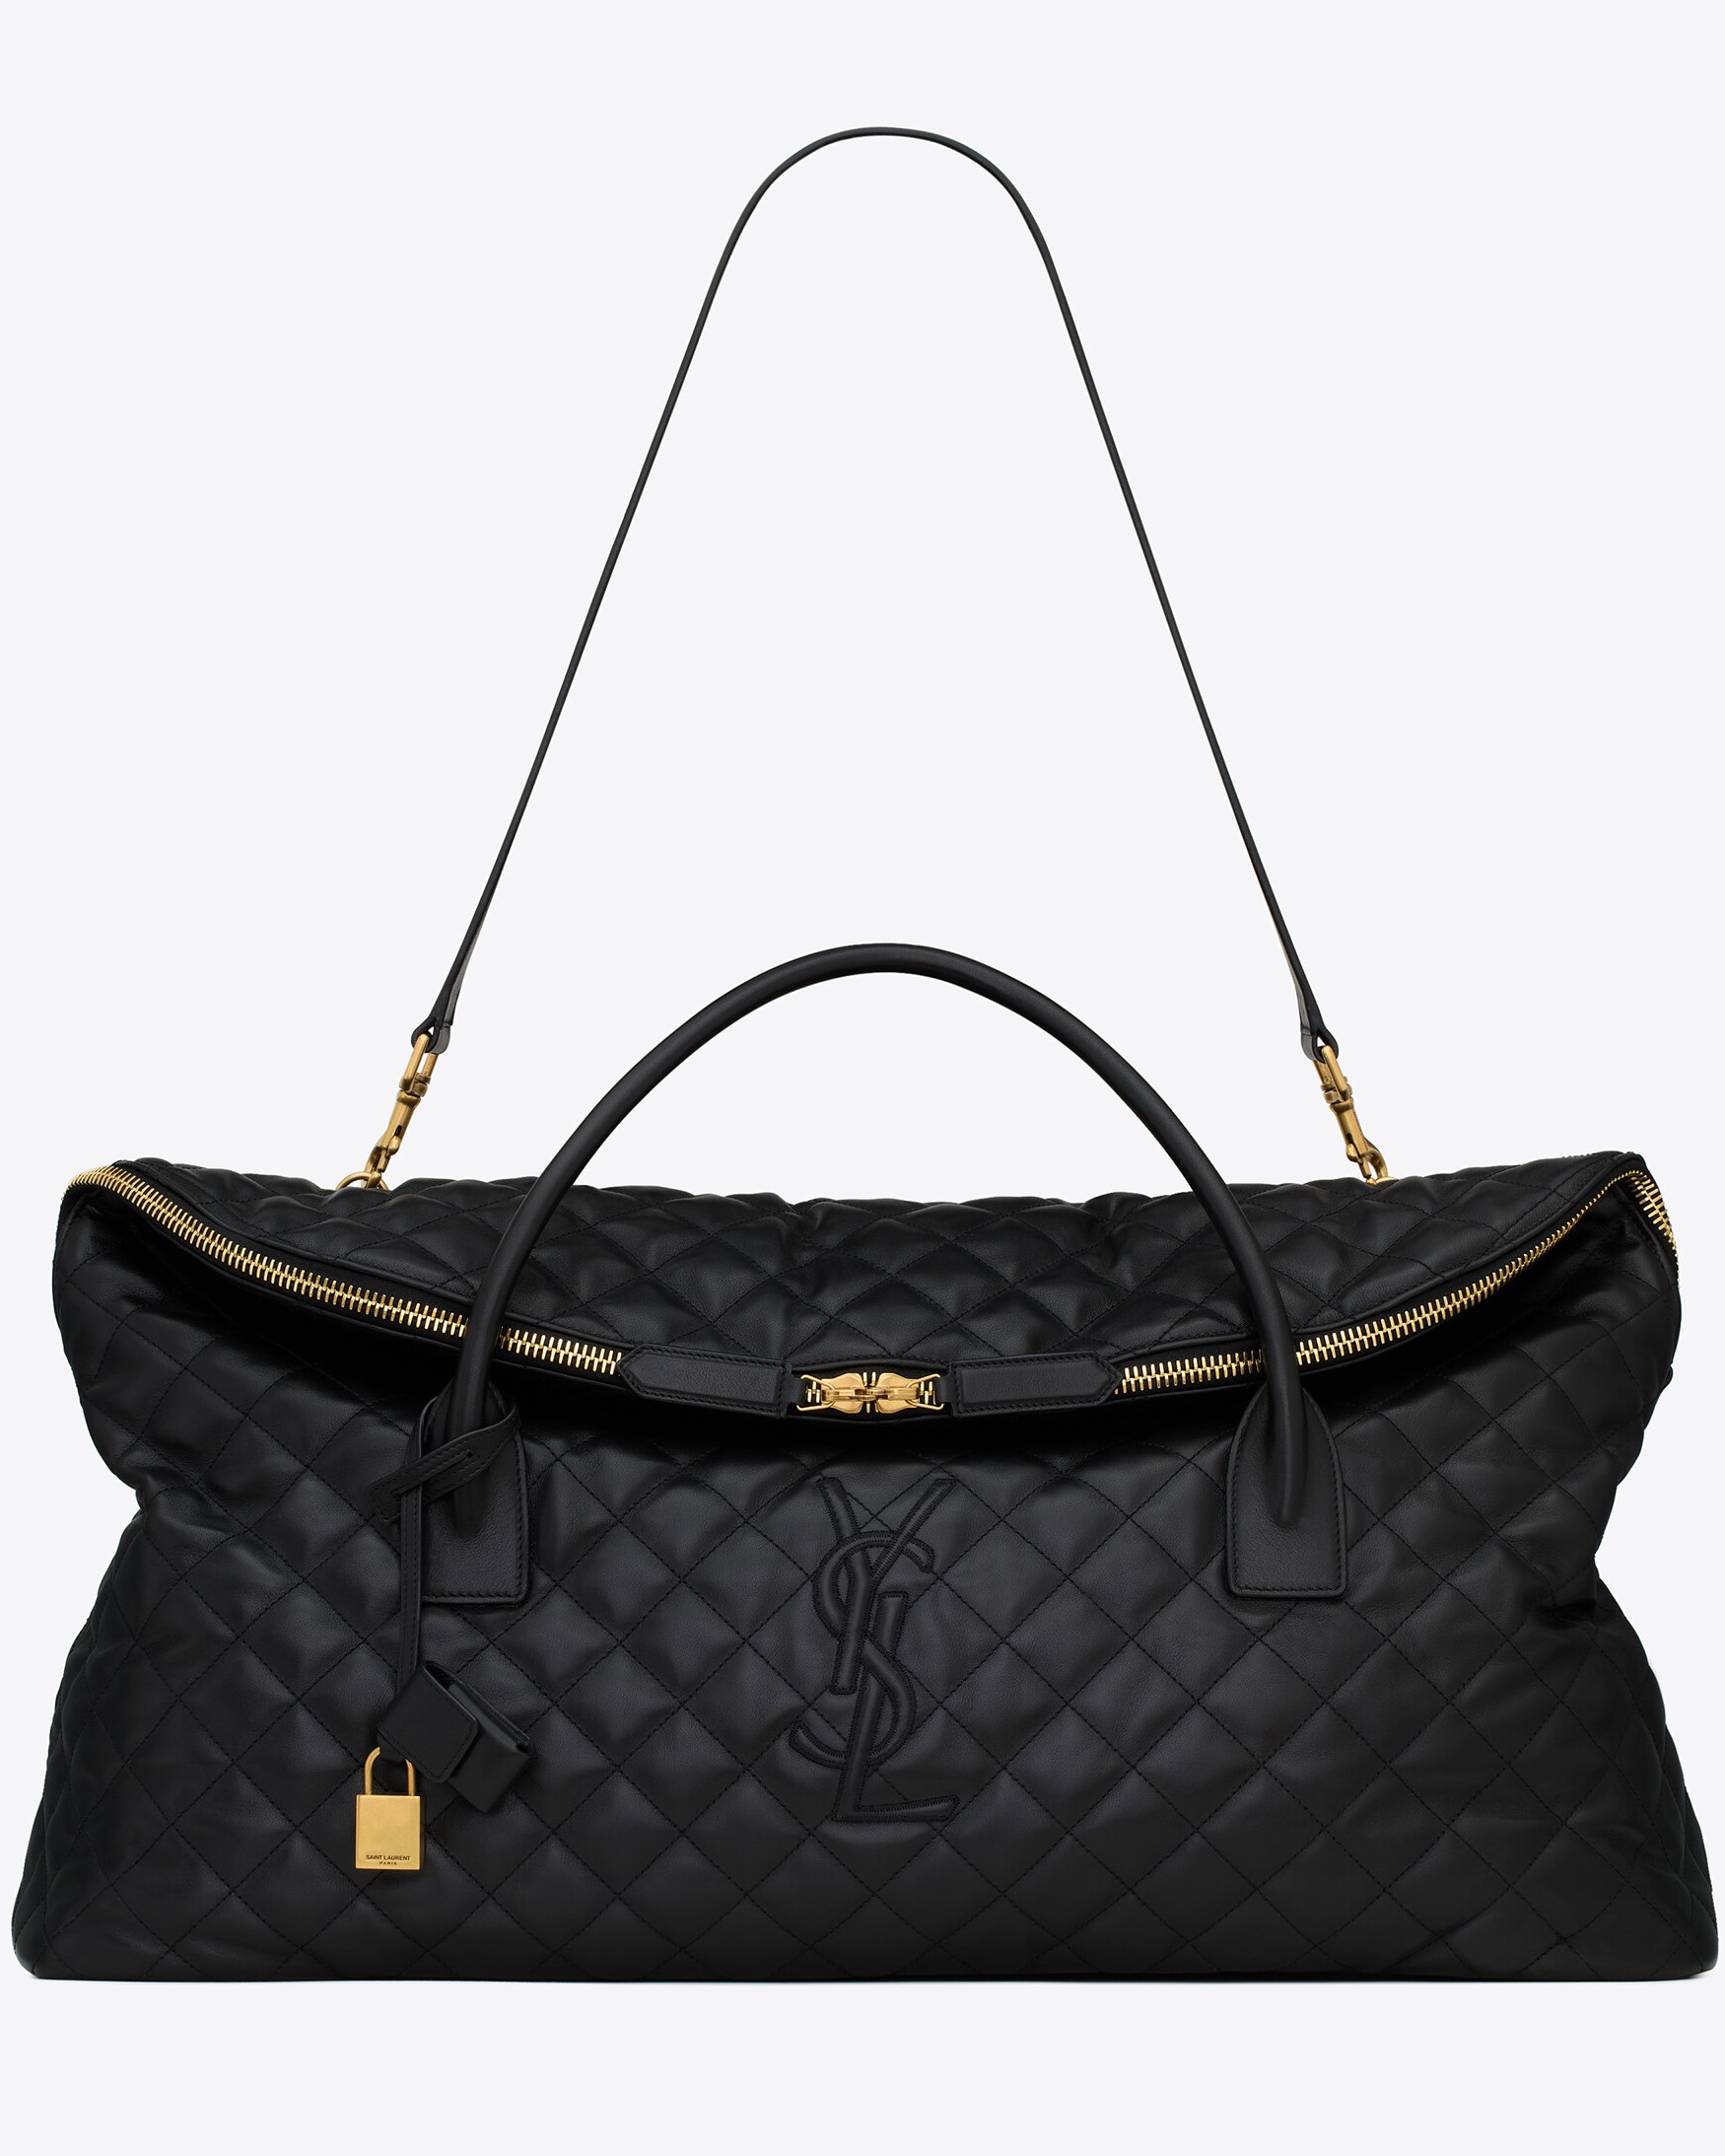 TÚI DU LỊCH YSL ES GIANT TRAVEL BAG IN QUILTED LEATHER 7